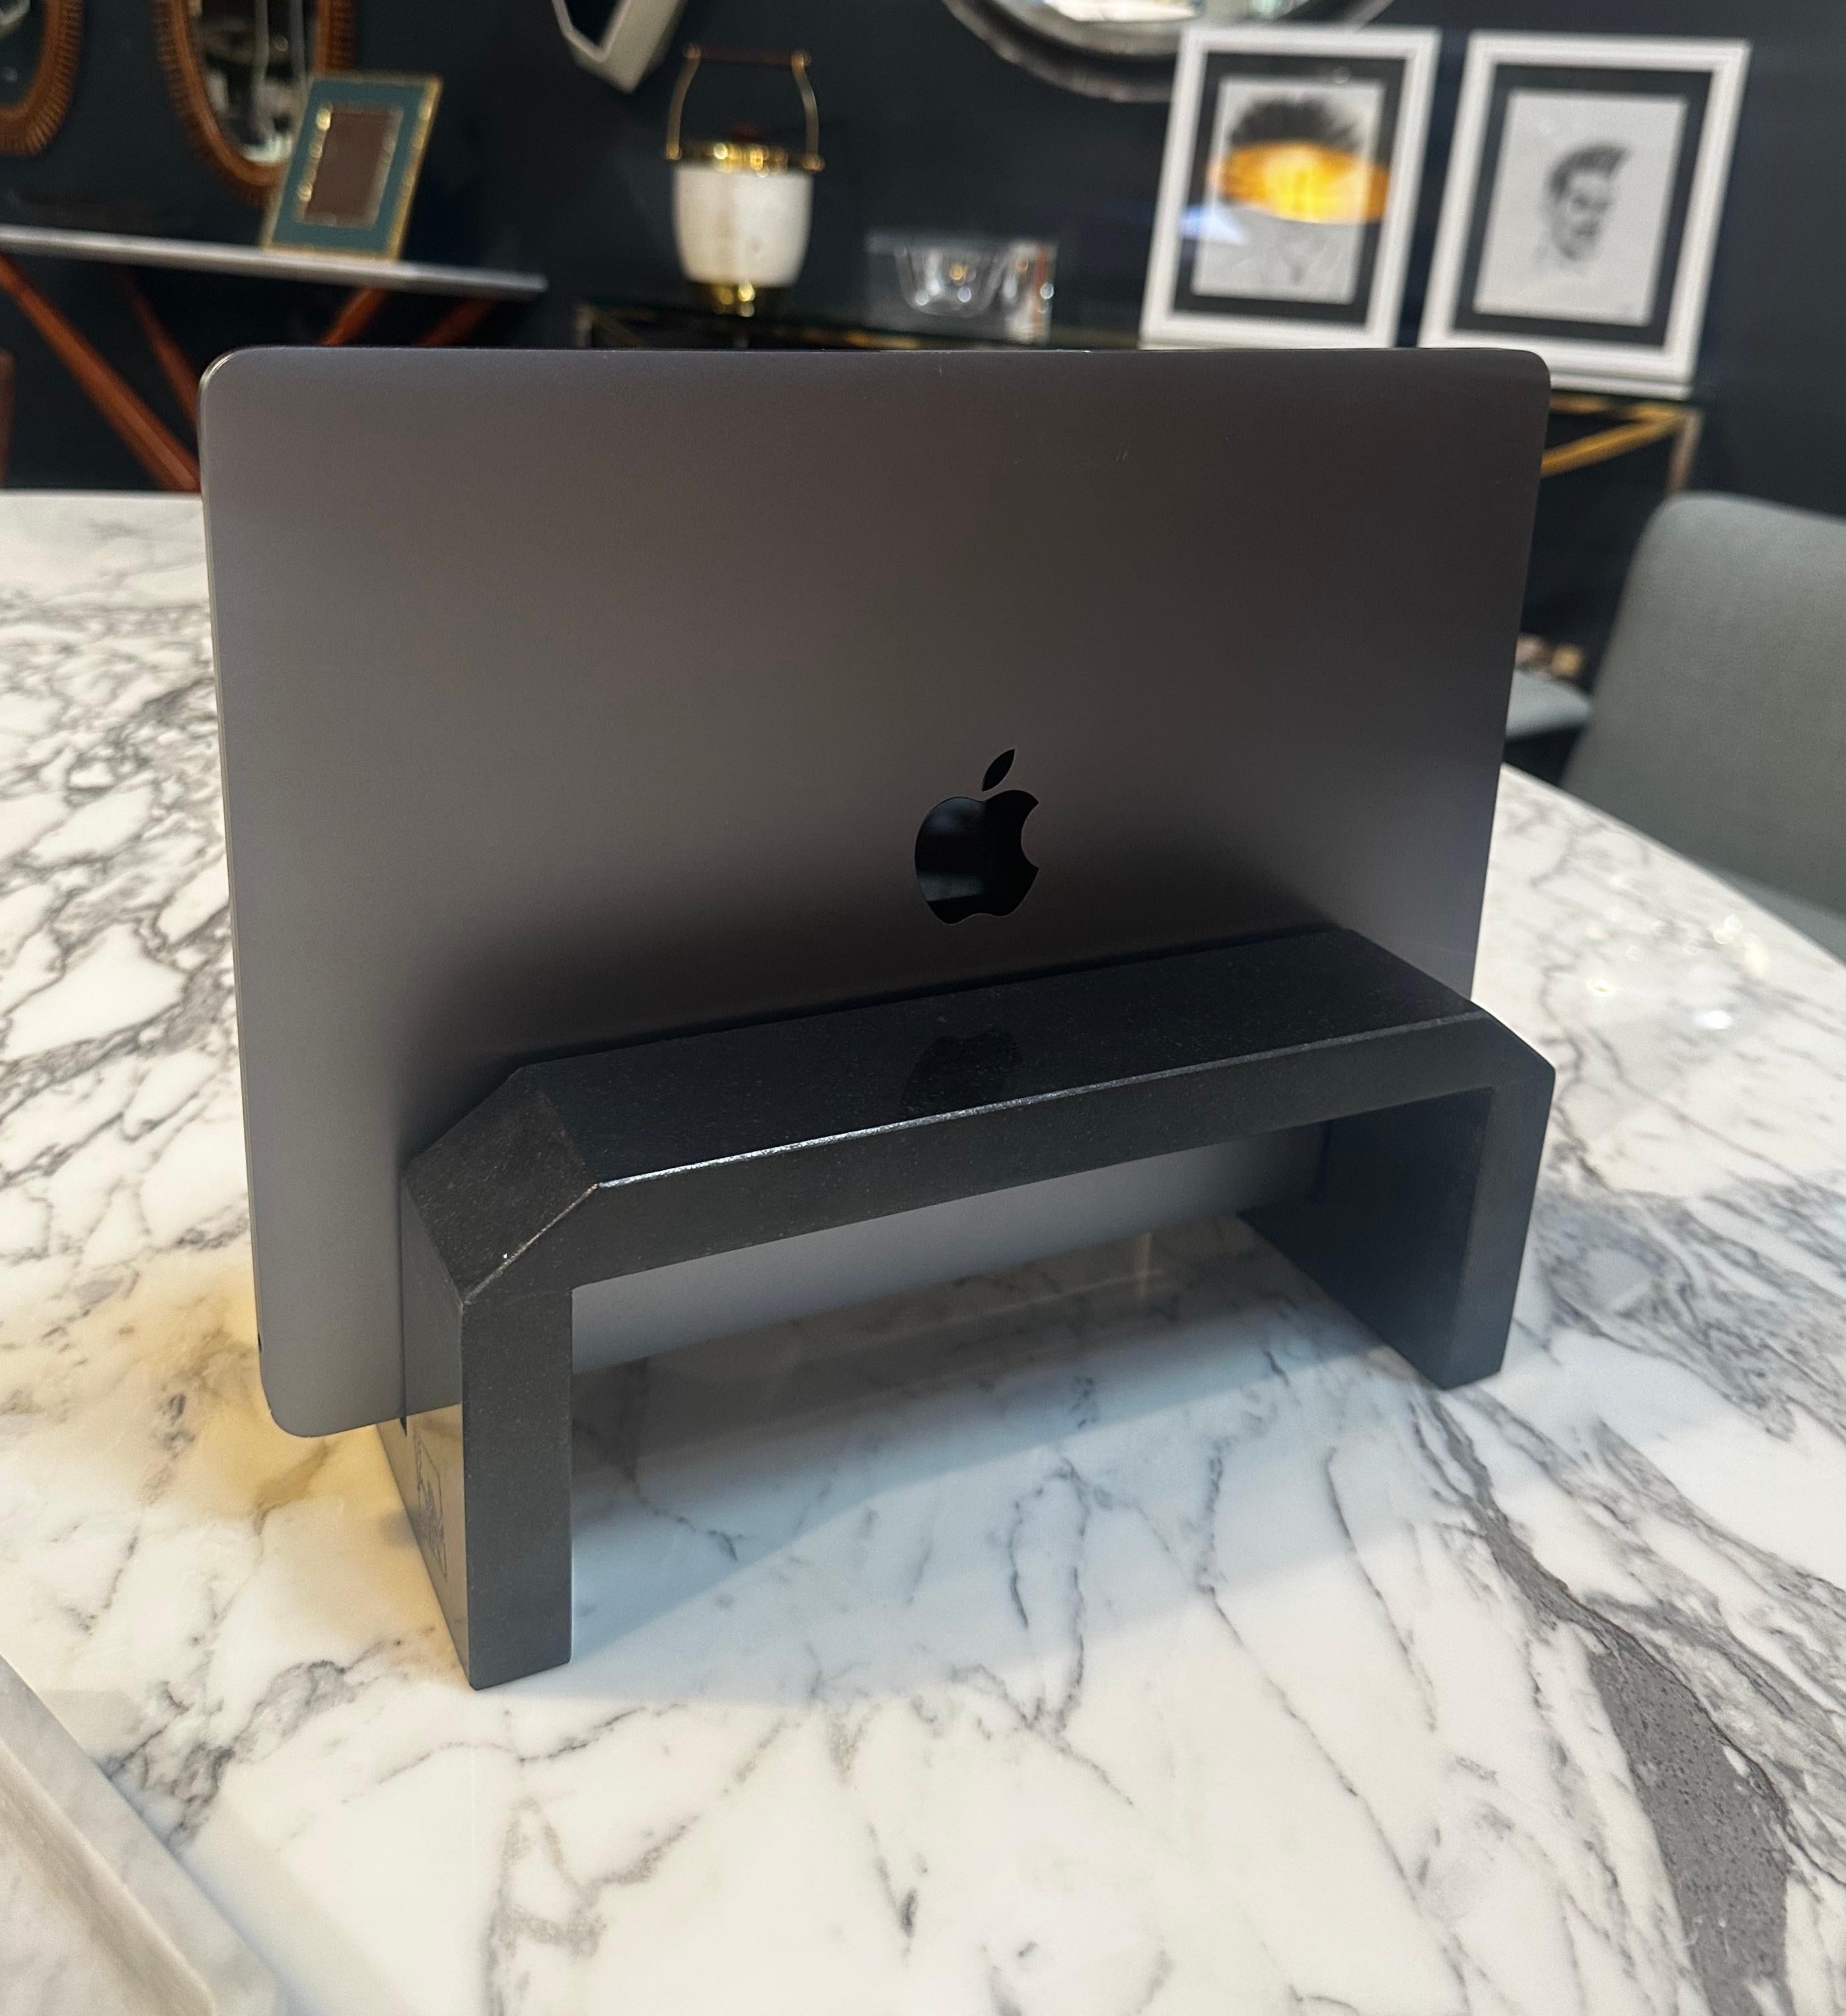 Lava stone Règo is a little jewel that adds a new experience when using a notebook combined with an external display, ideal for saving space and creating a clean and tidy environment on the desk. This vertical stand is a fine and robust accessory,